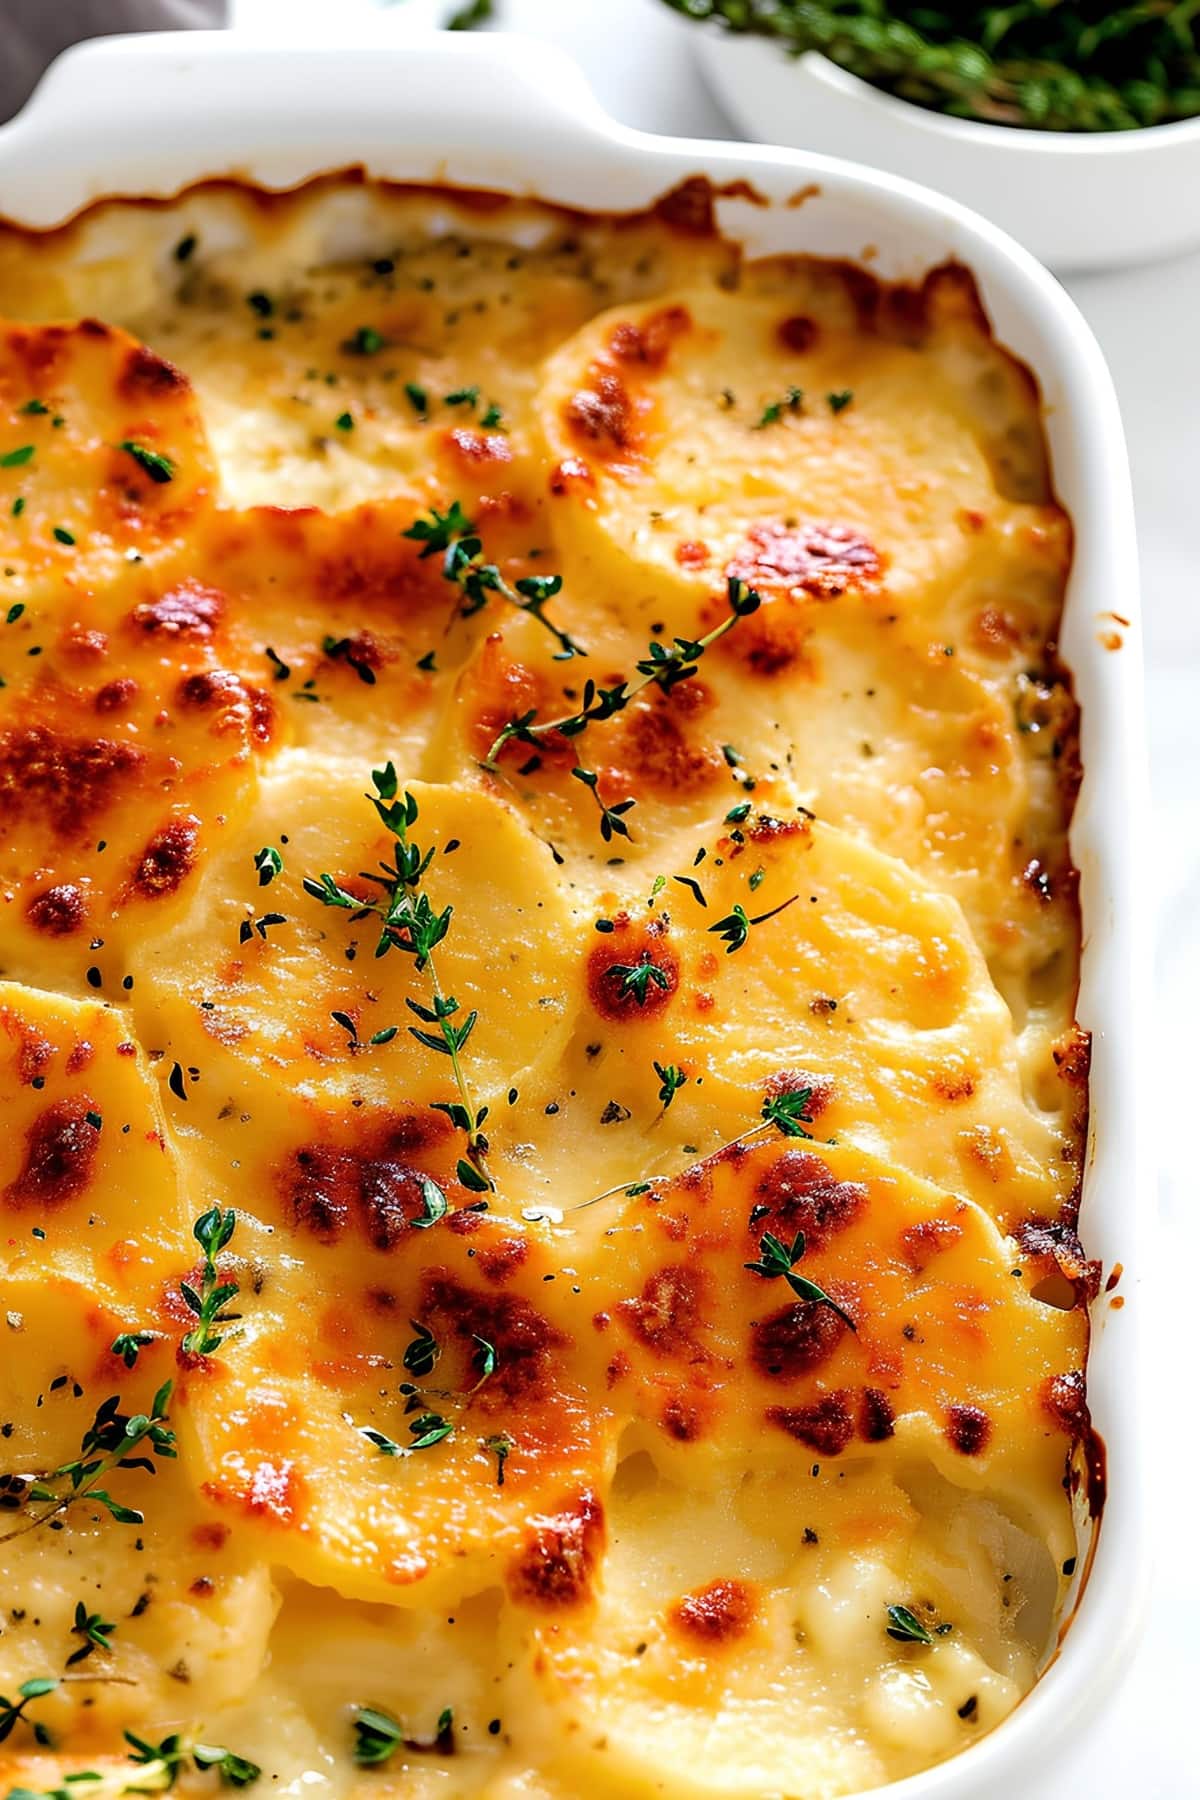 Creamy and buttery scalloped potatoes in a white casserole